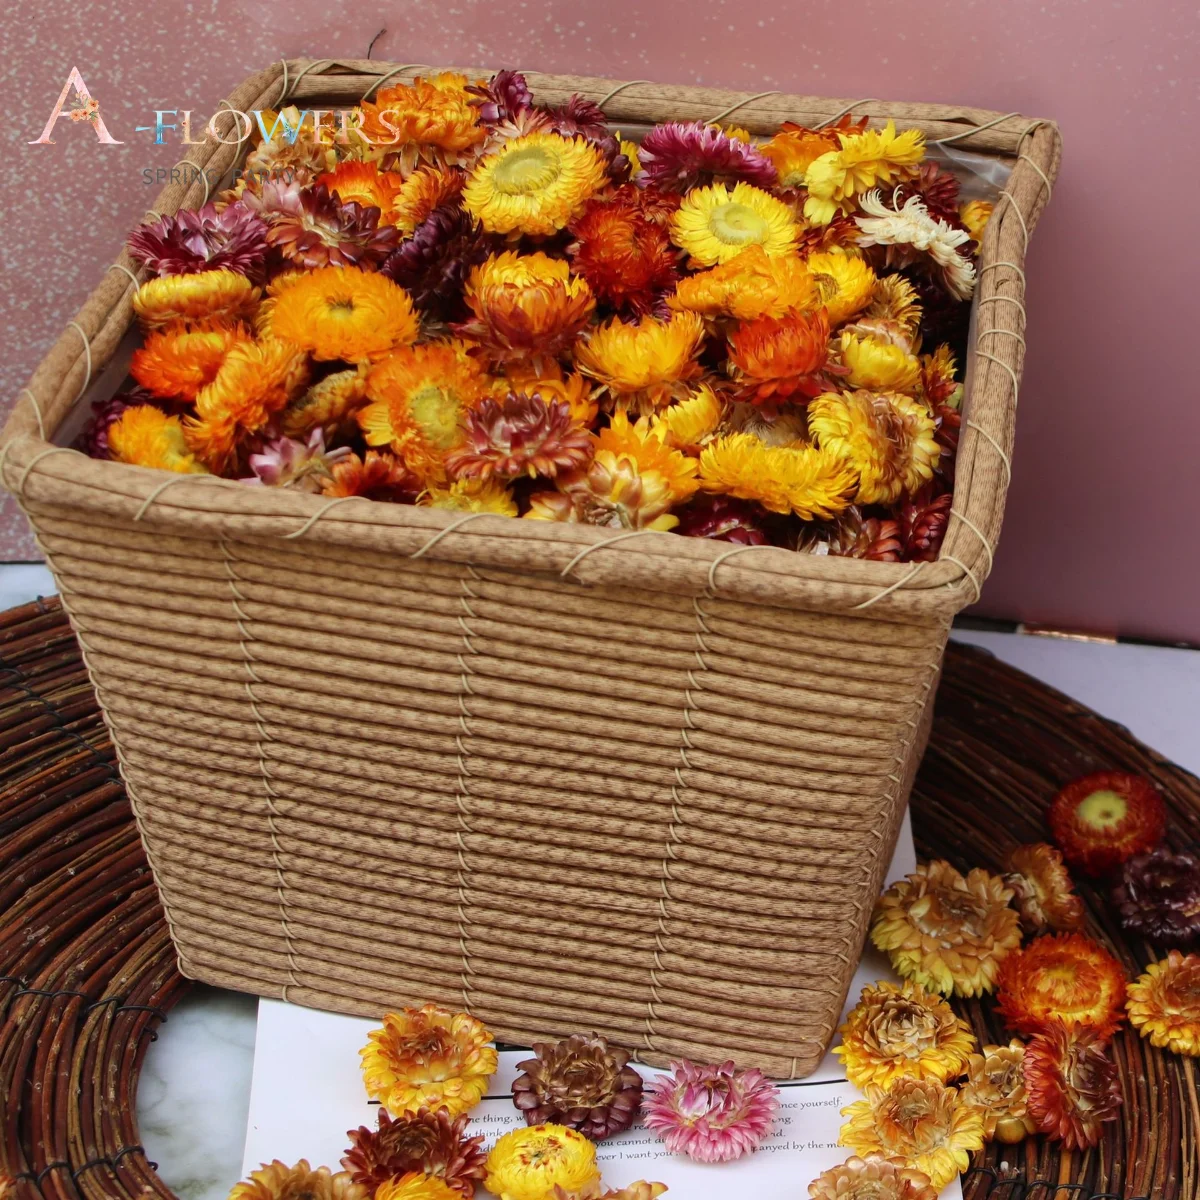 30-70Pcs Natural Daisy Dried Flowers Sunflower Boho Home Decor Dry Chrysanthemum Heads Aesthetic Wedding Party Artificial Flower